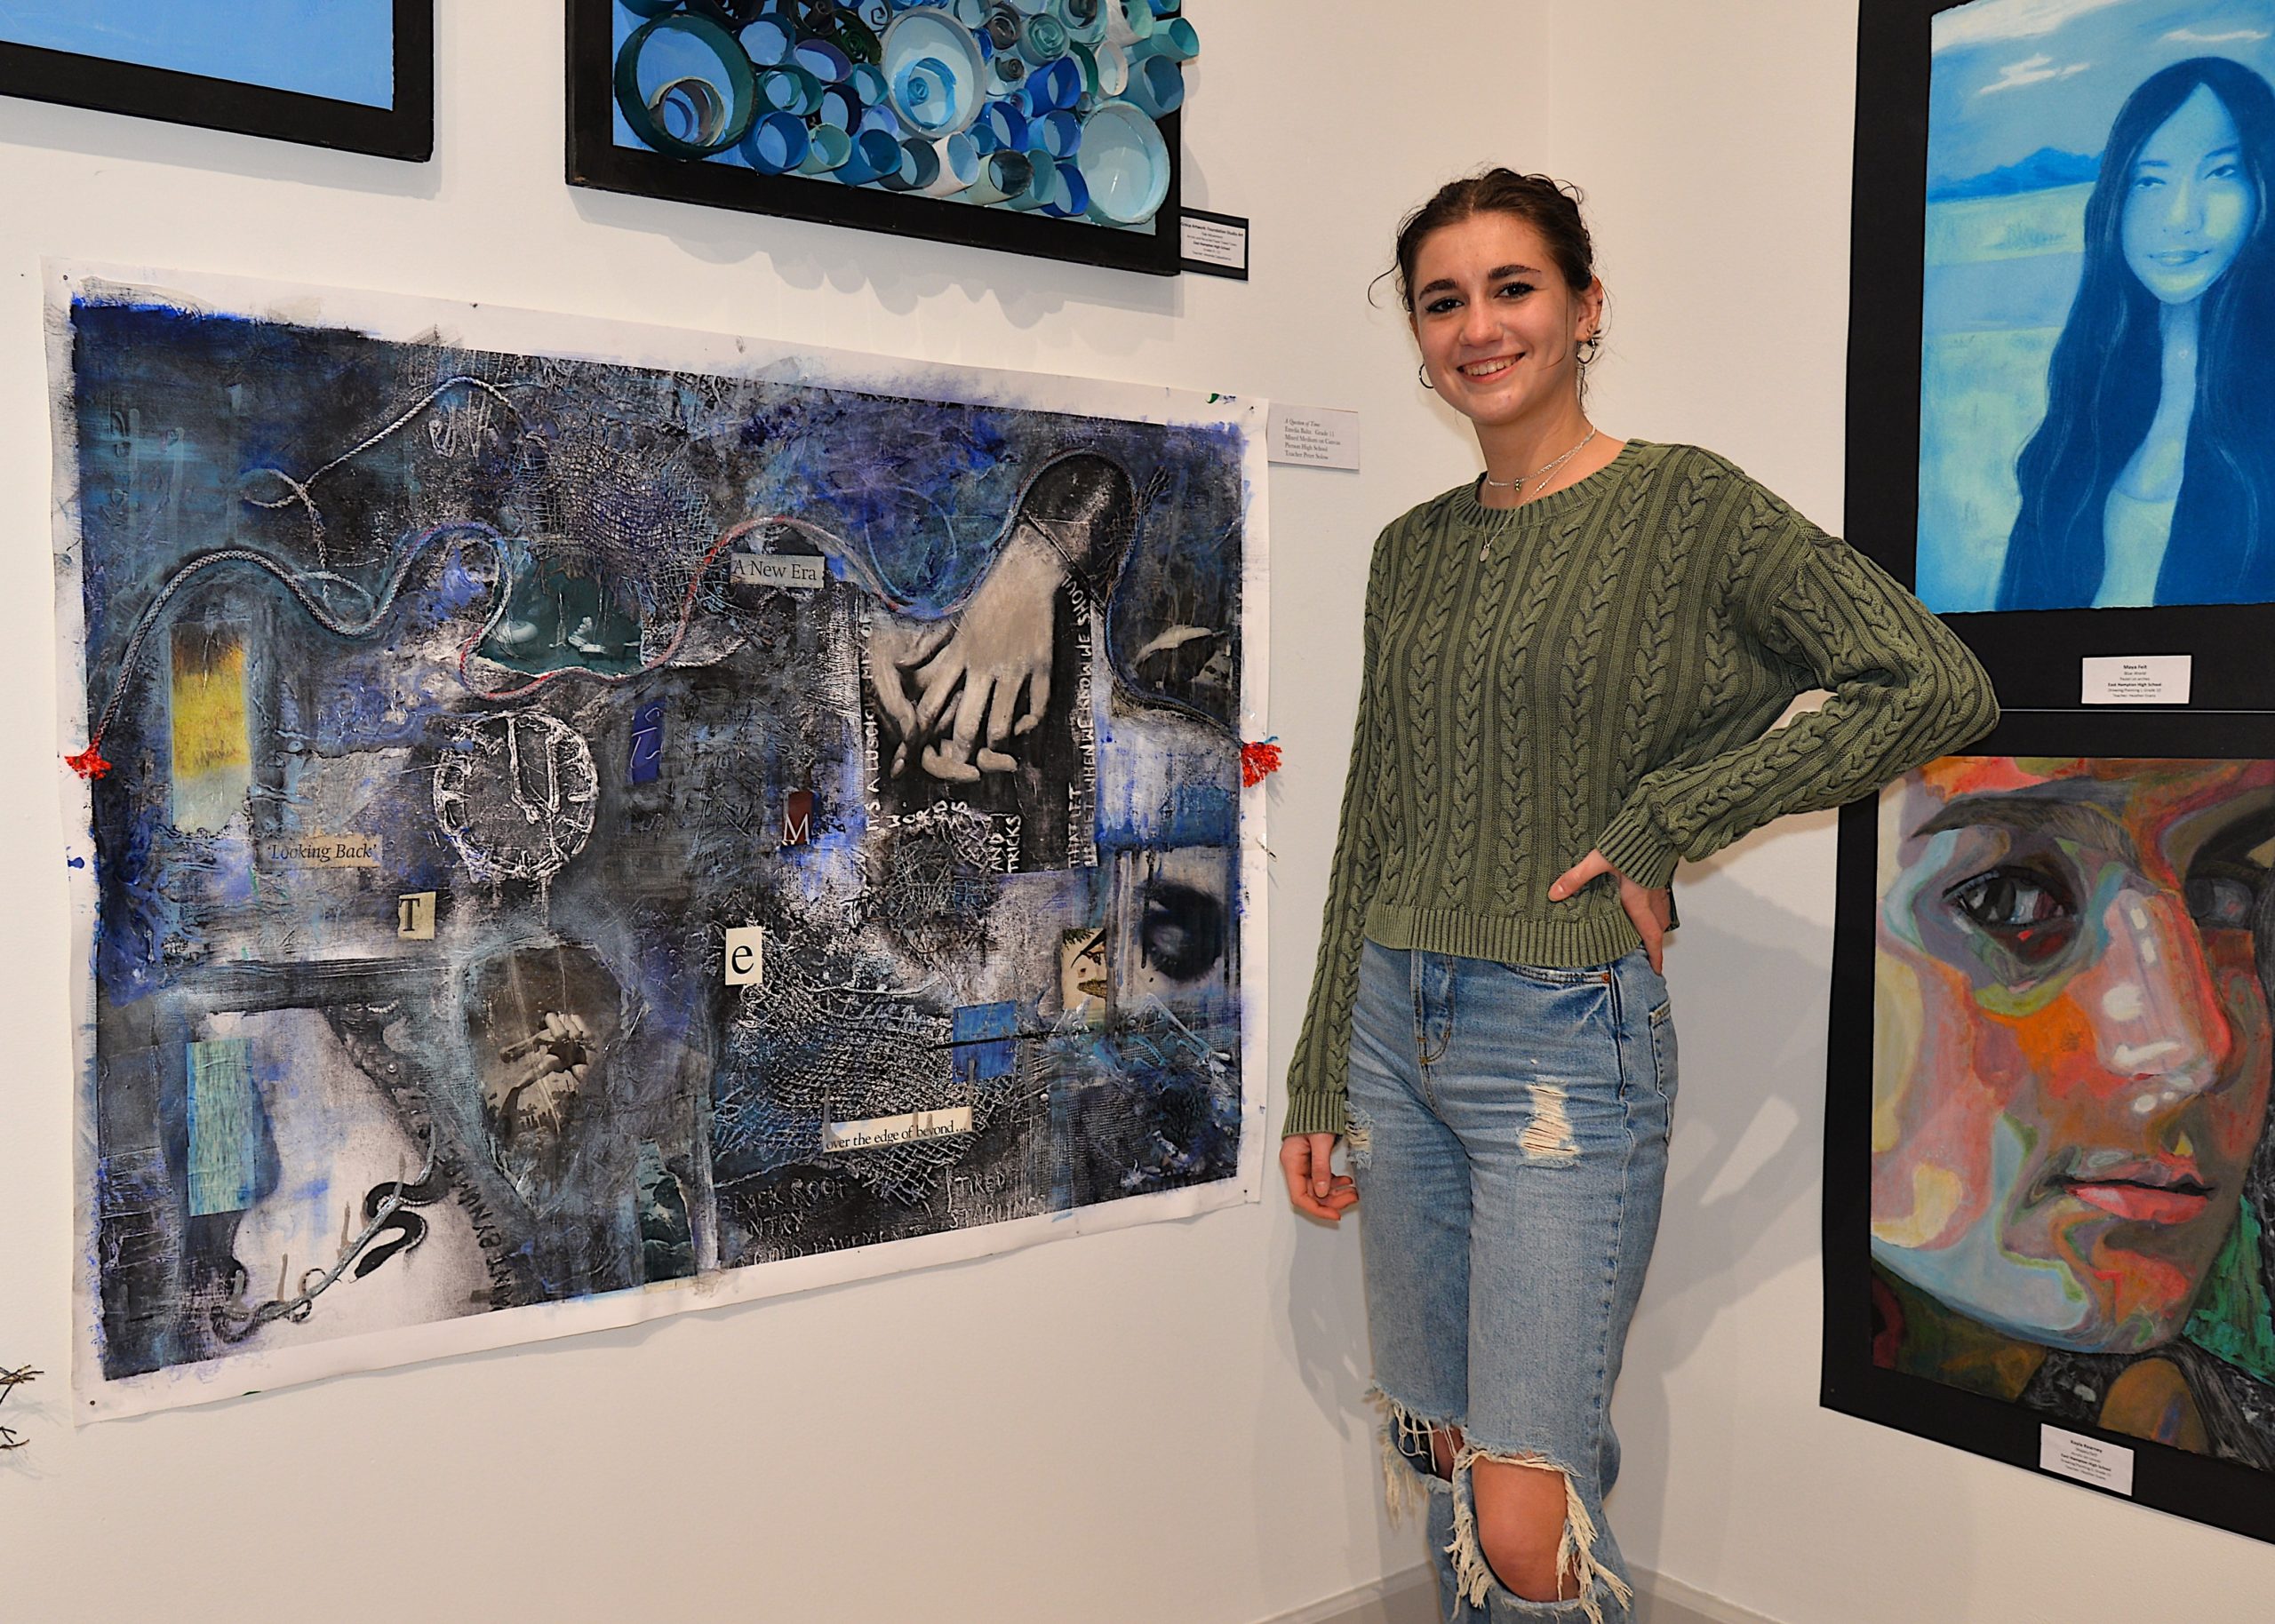 The Student Arts Festival opened at Guild Hall on Saturday with a reception. KYRIL BROMLEY